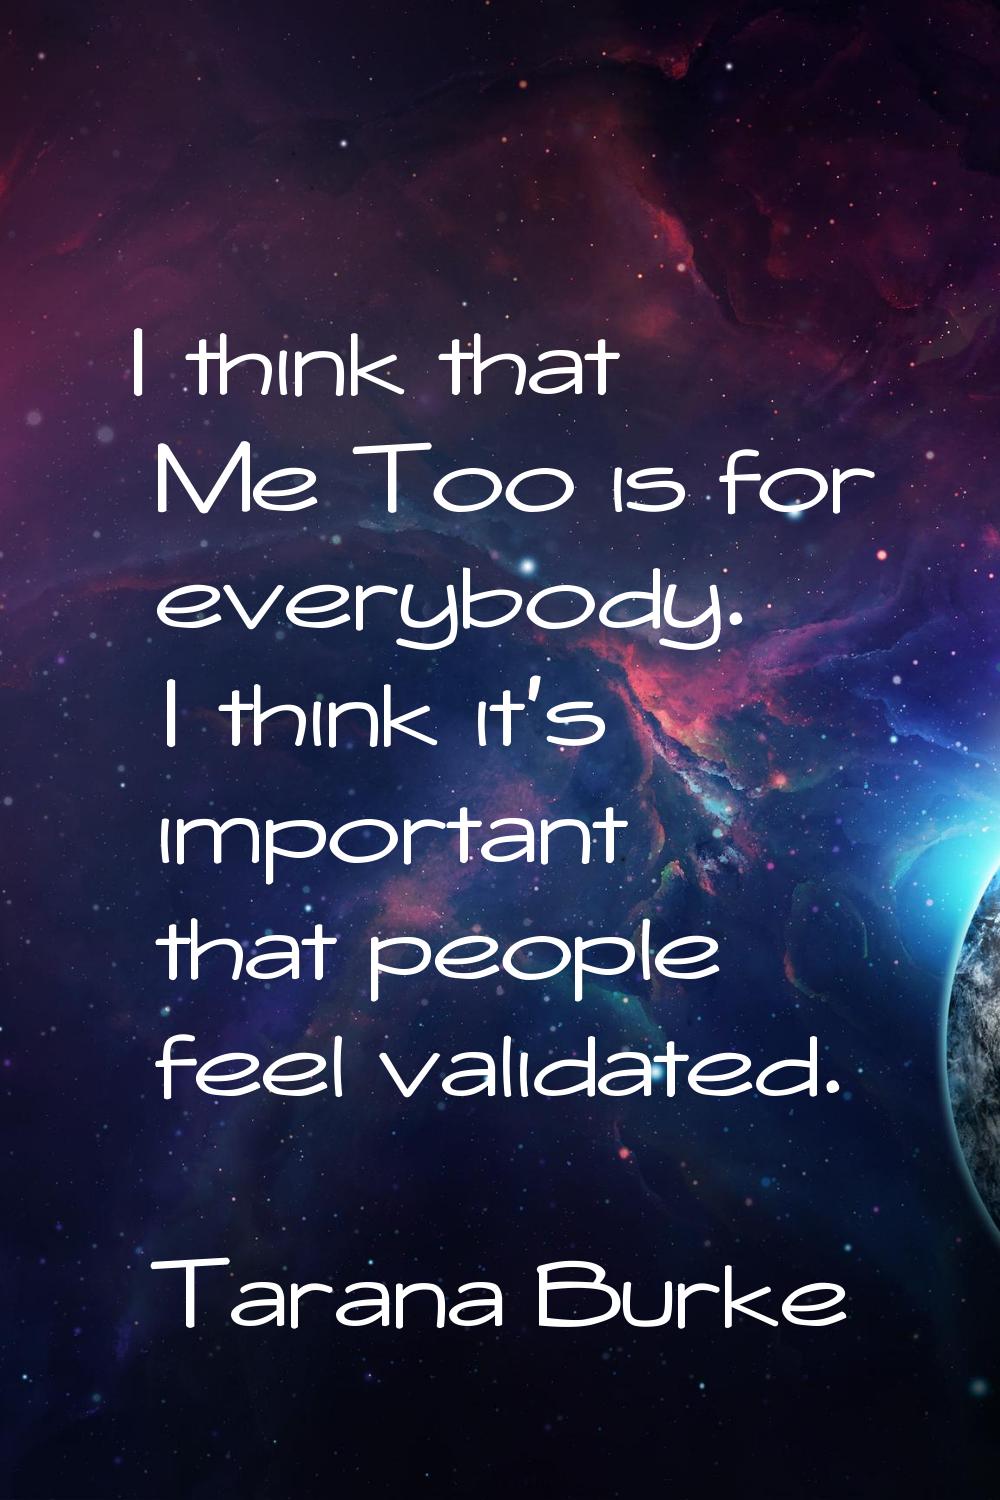 I think that Me Too is for everybody. I think it's important that people feel validated.